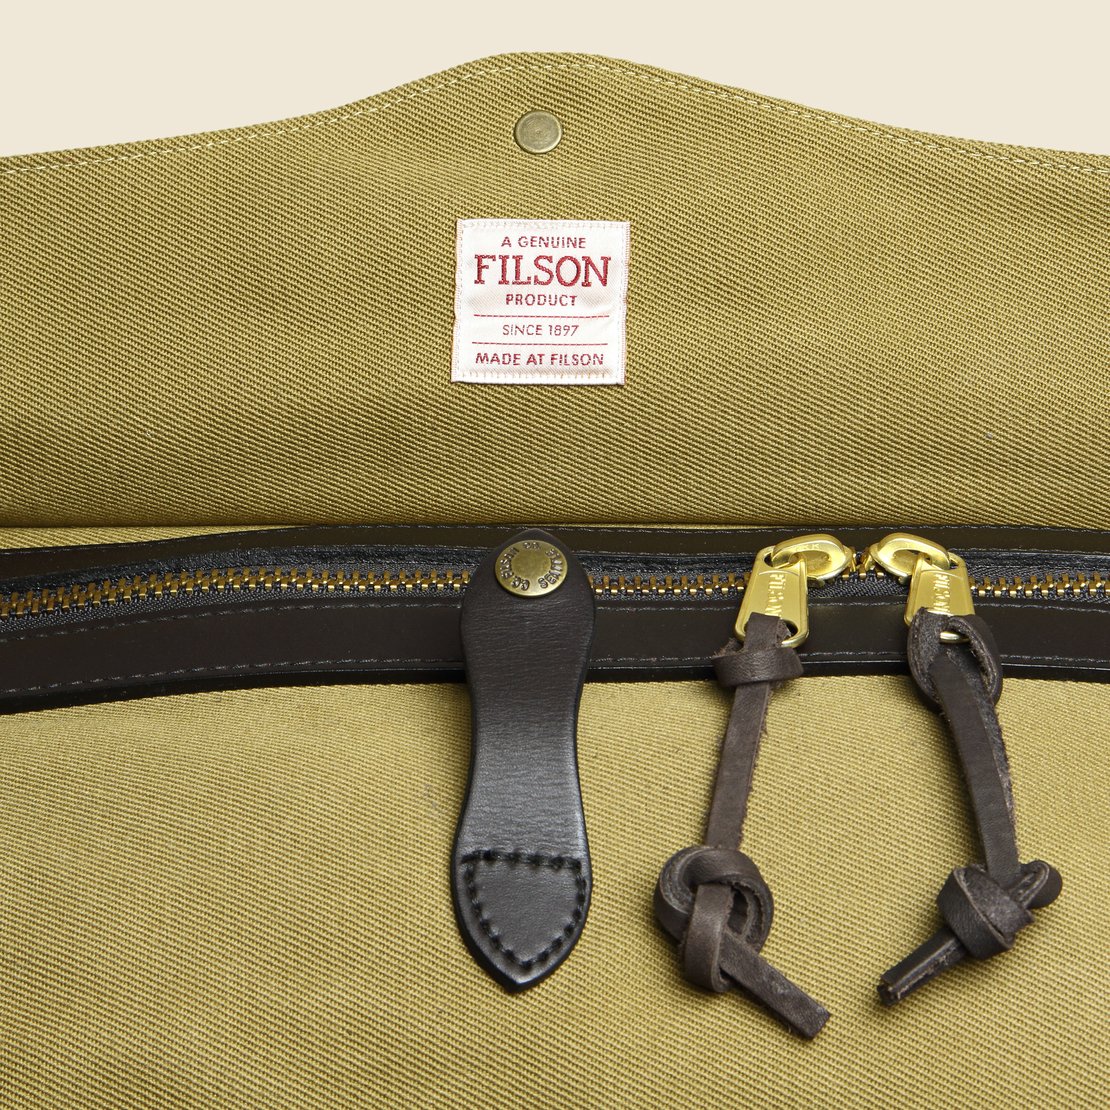 Medium Carry On Duffle Bag - Tan - Filson - STAG Provisions - Accessories - Bags / Luggage